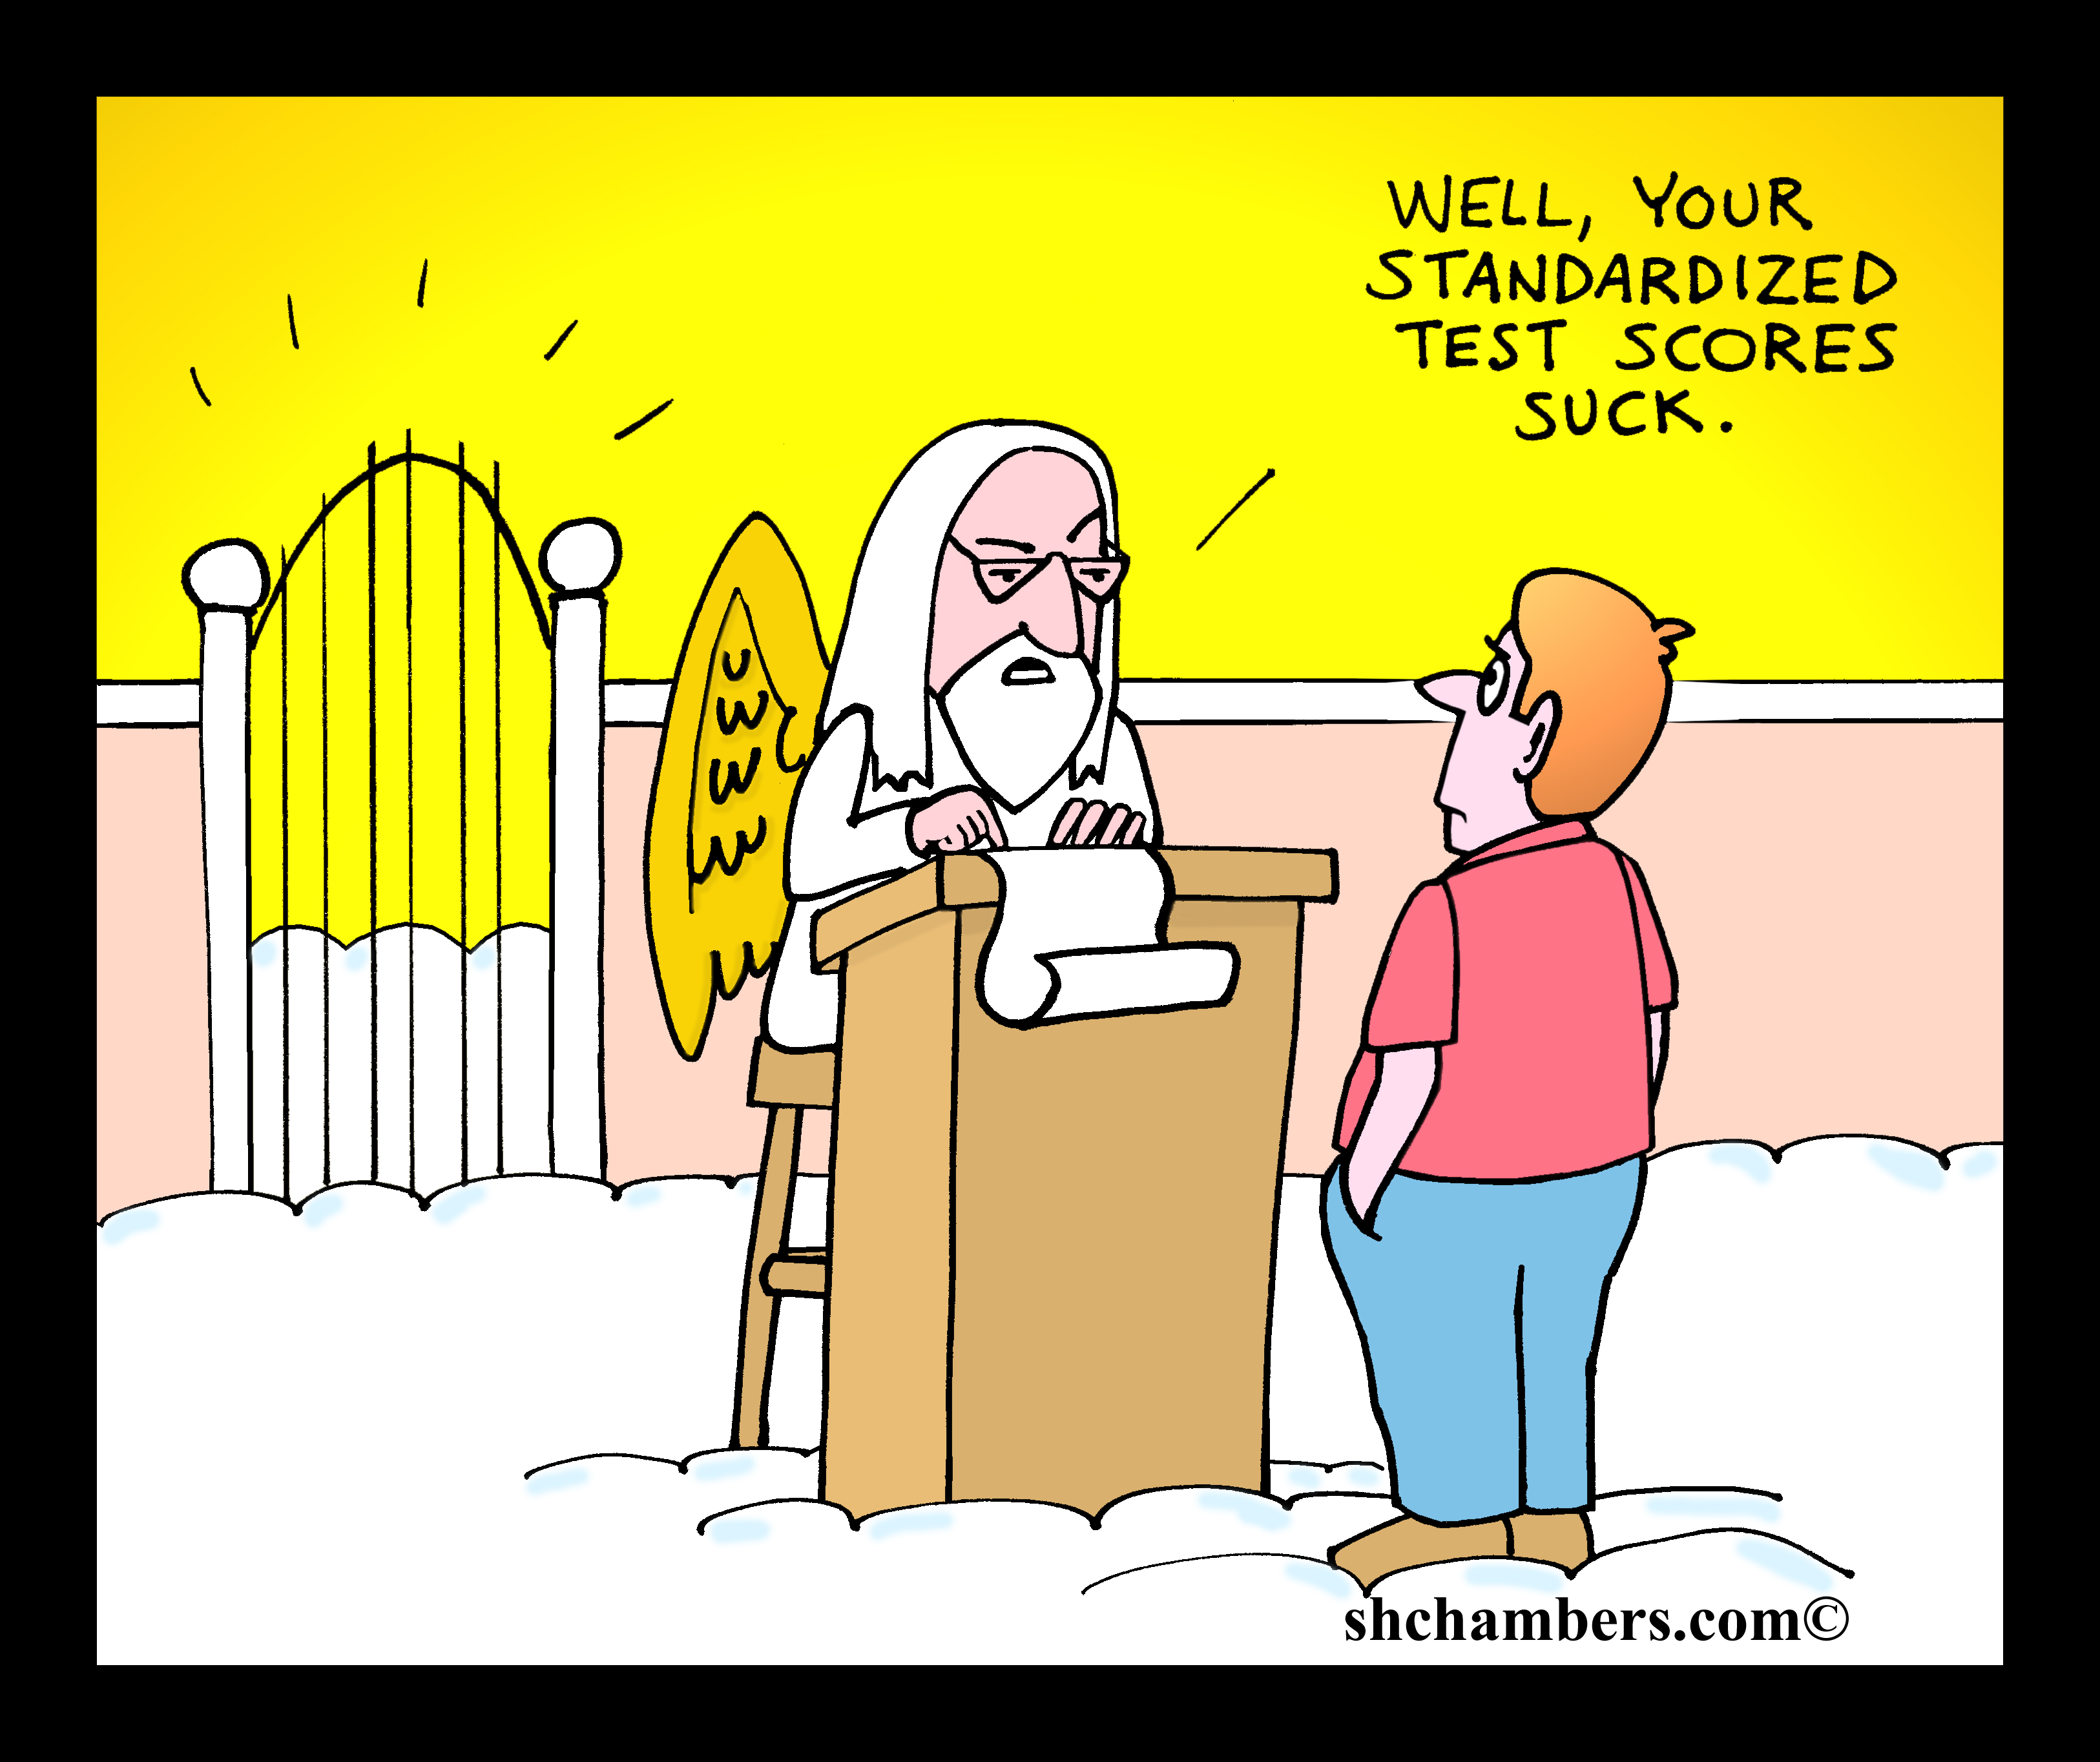 It is a little known fact that standardized test scores weigh heavily in the decision whether to.....